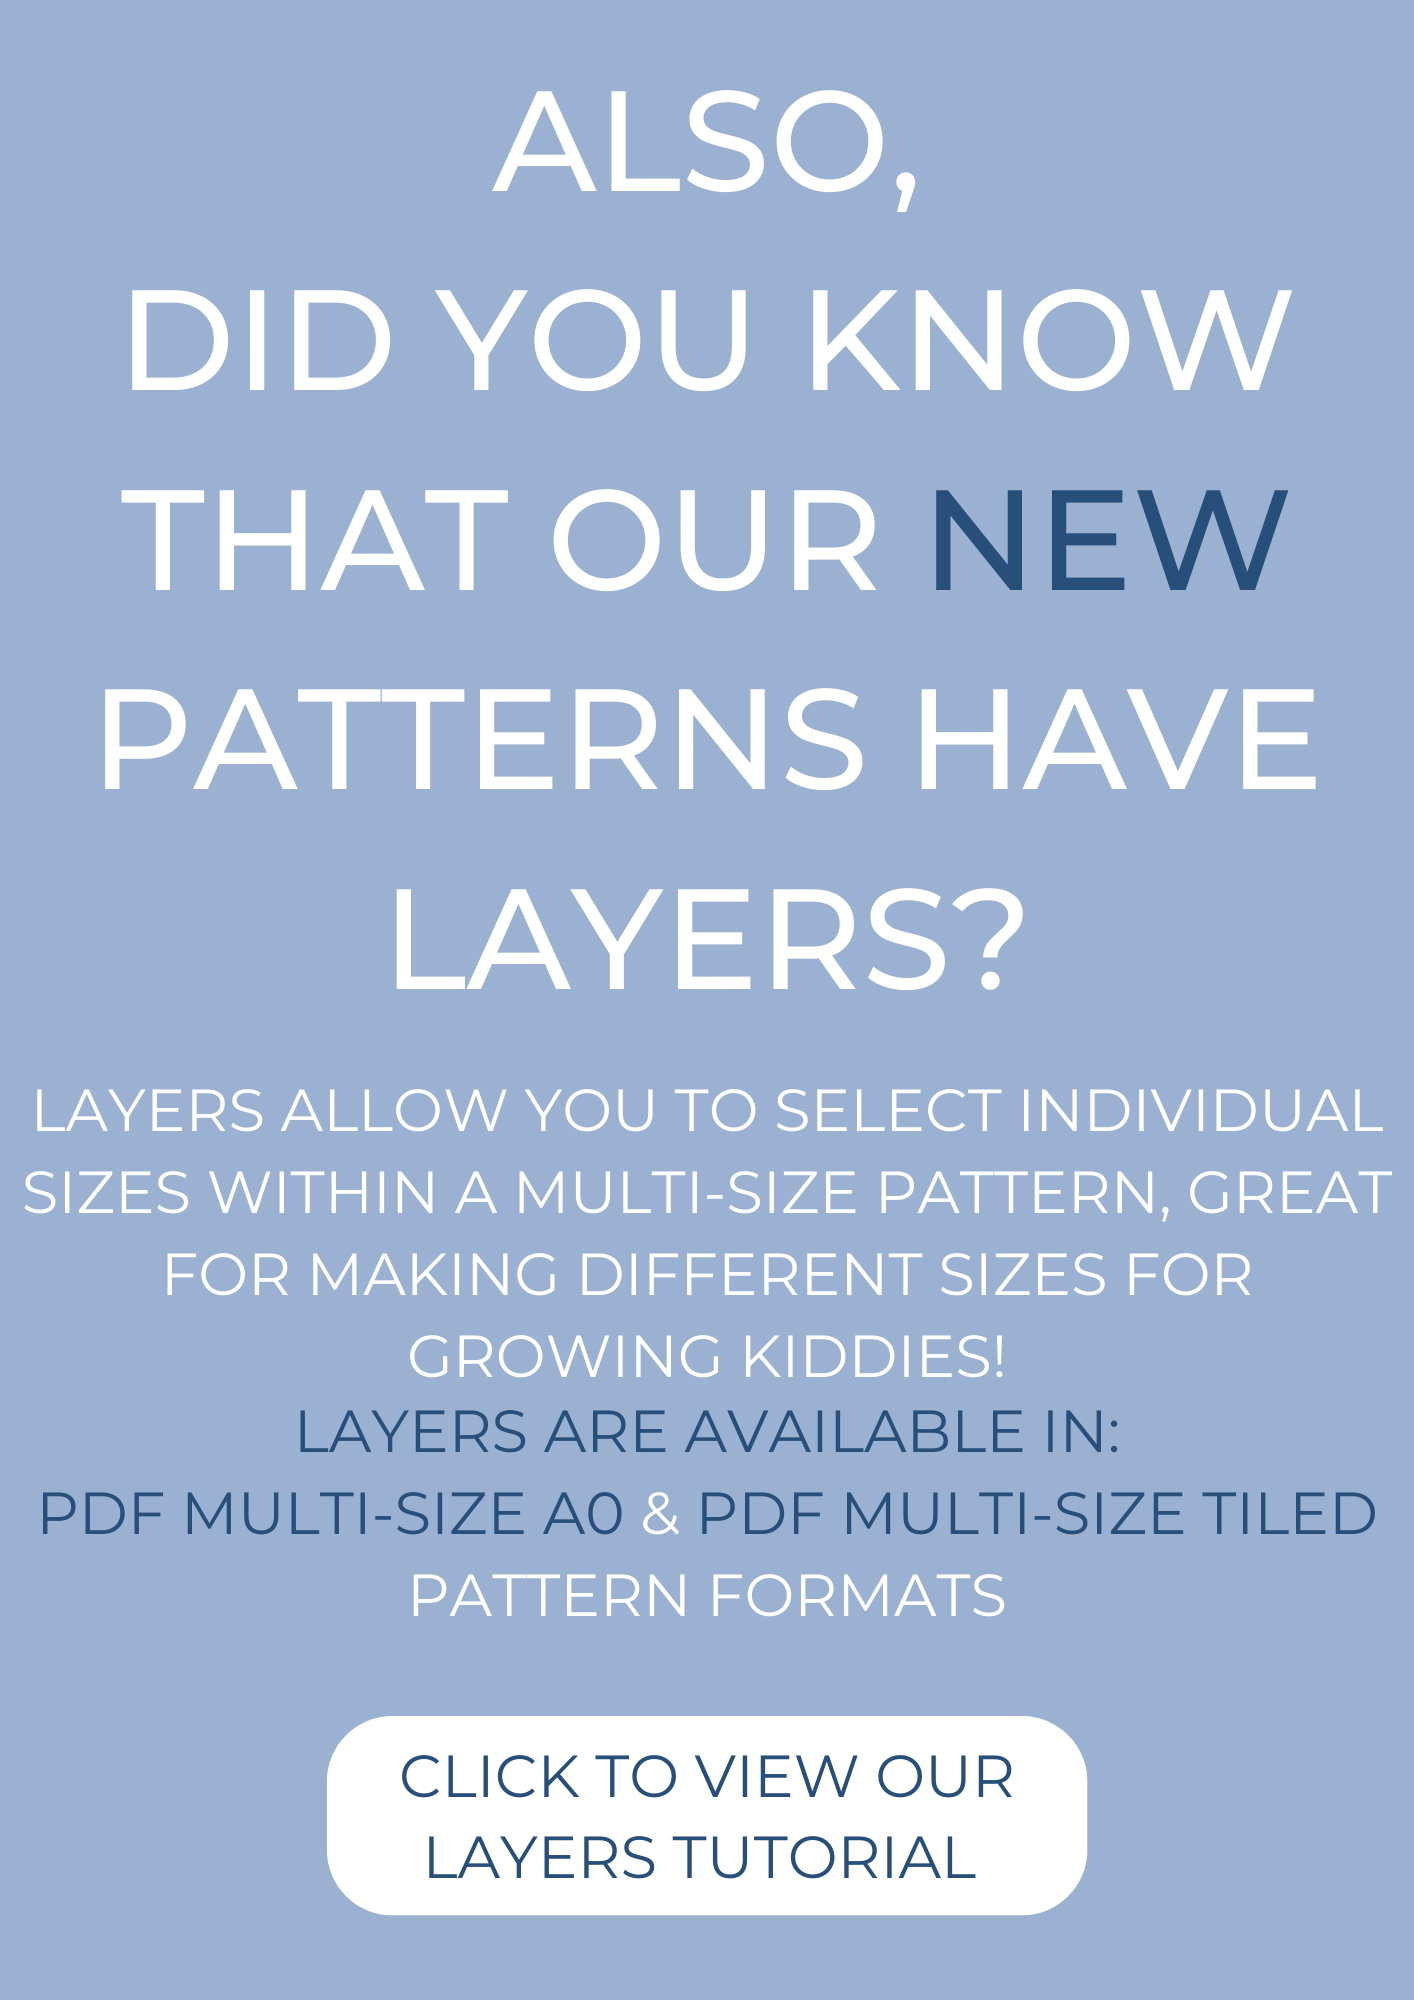 All our new patterns are now layered! Click here to learn more.